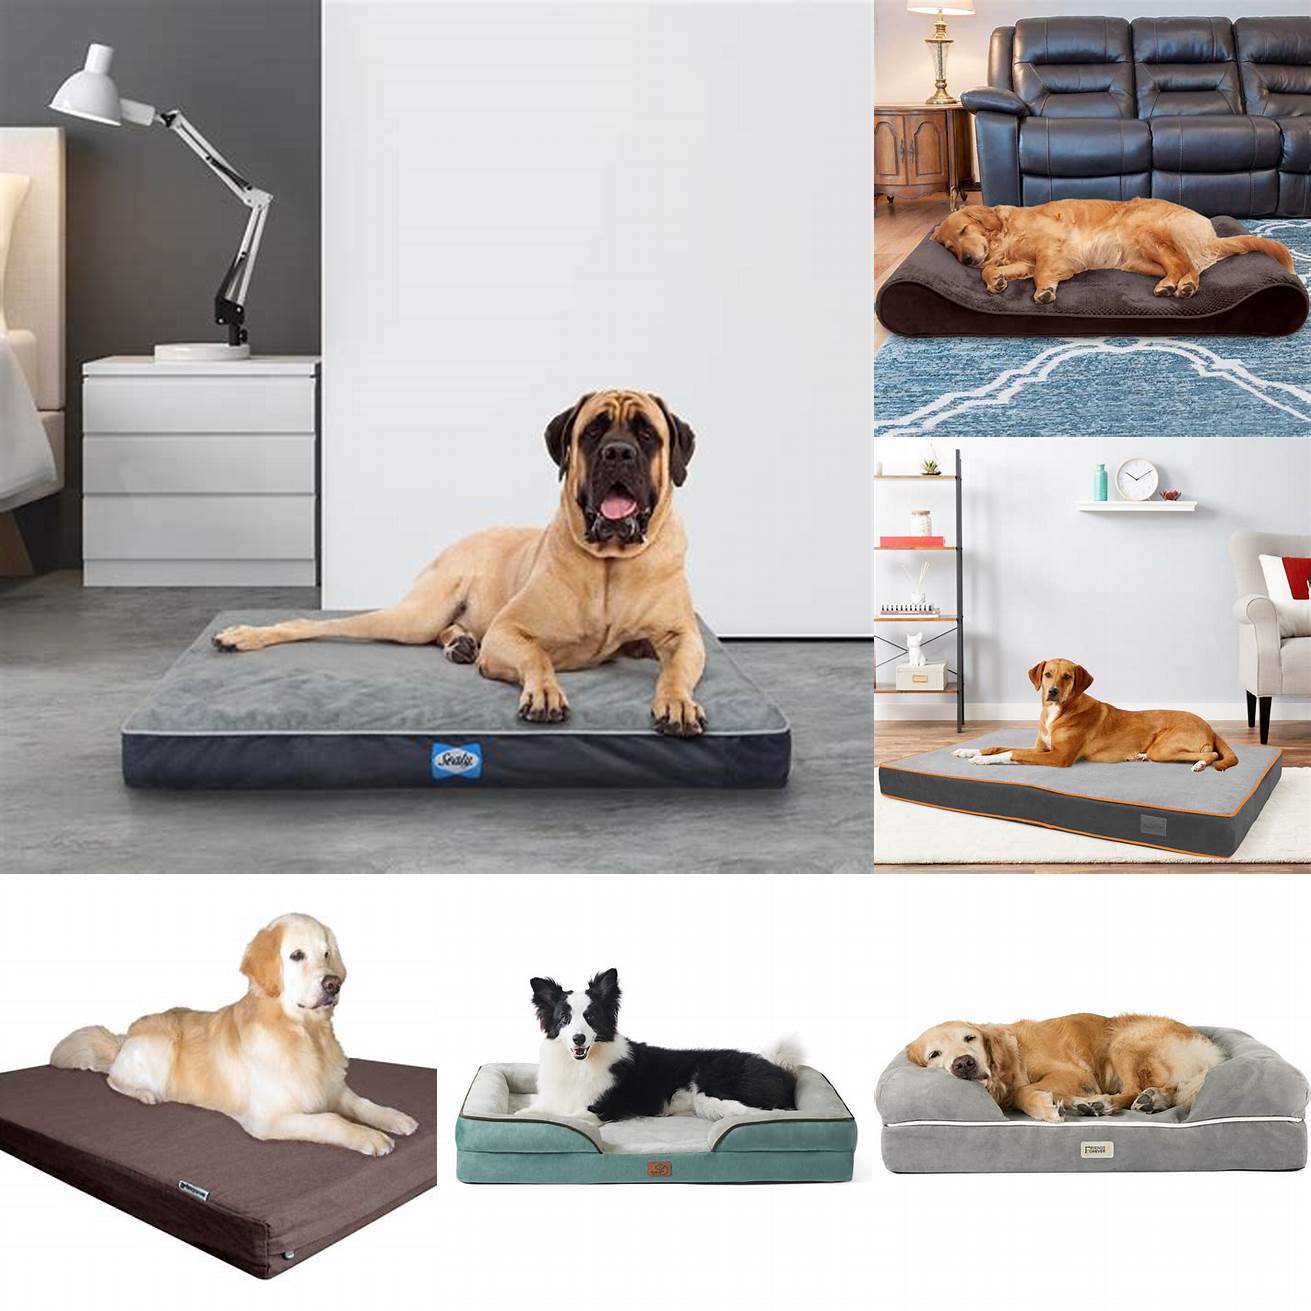 This orthopedic bed provides extra support and comfort for dogs with joint pain